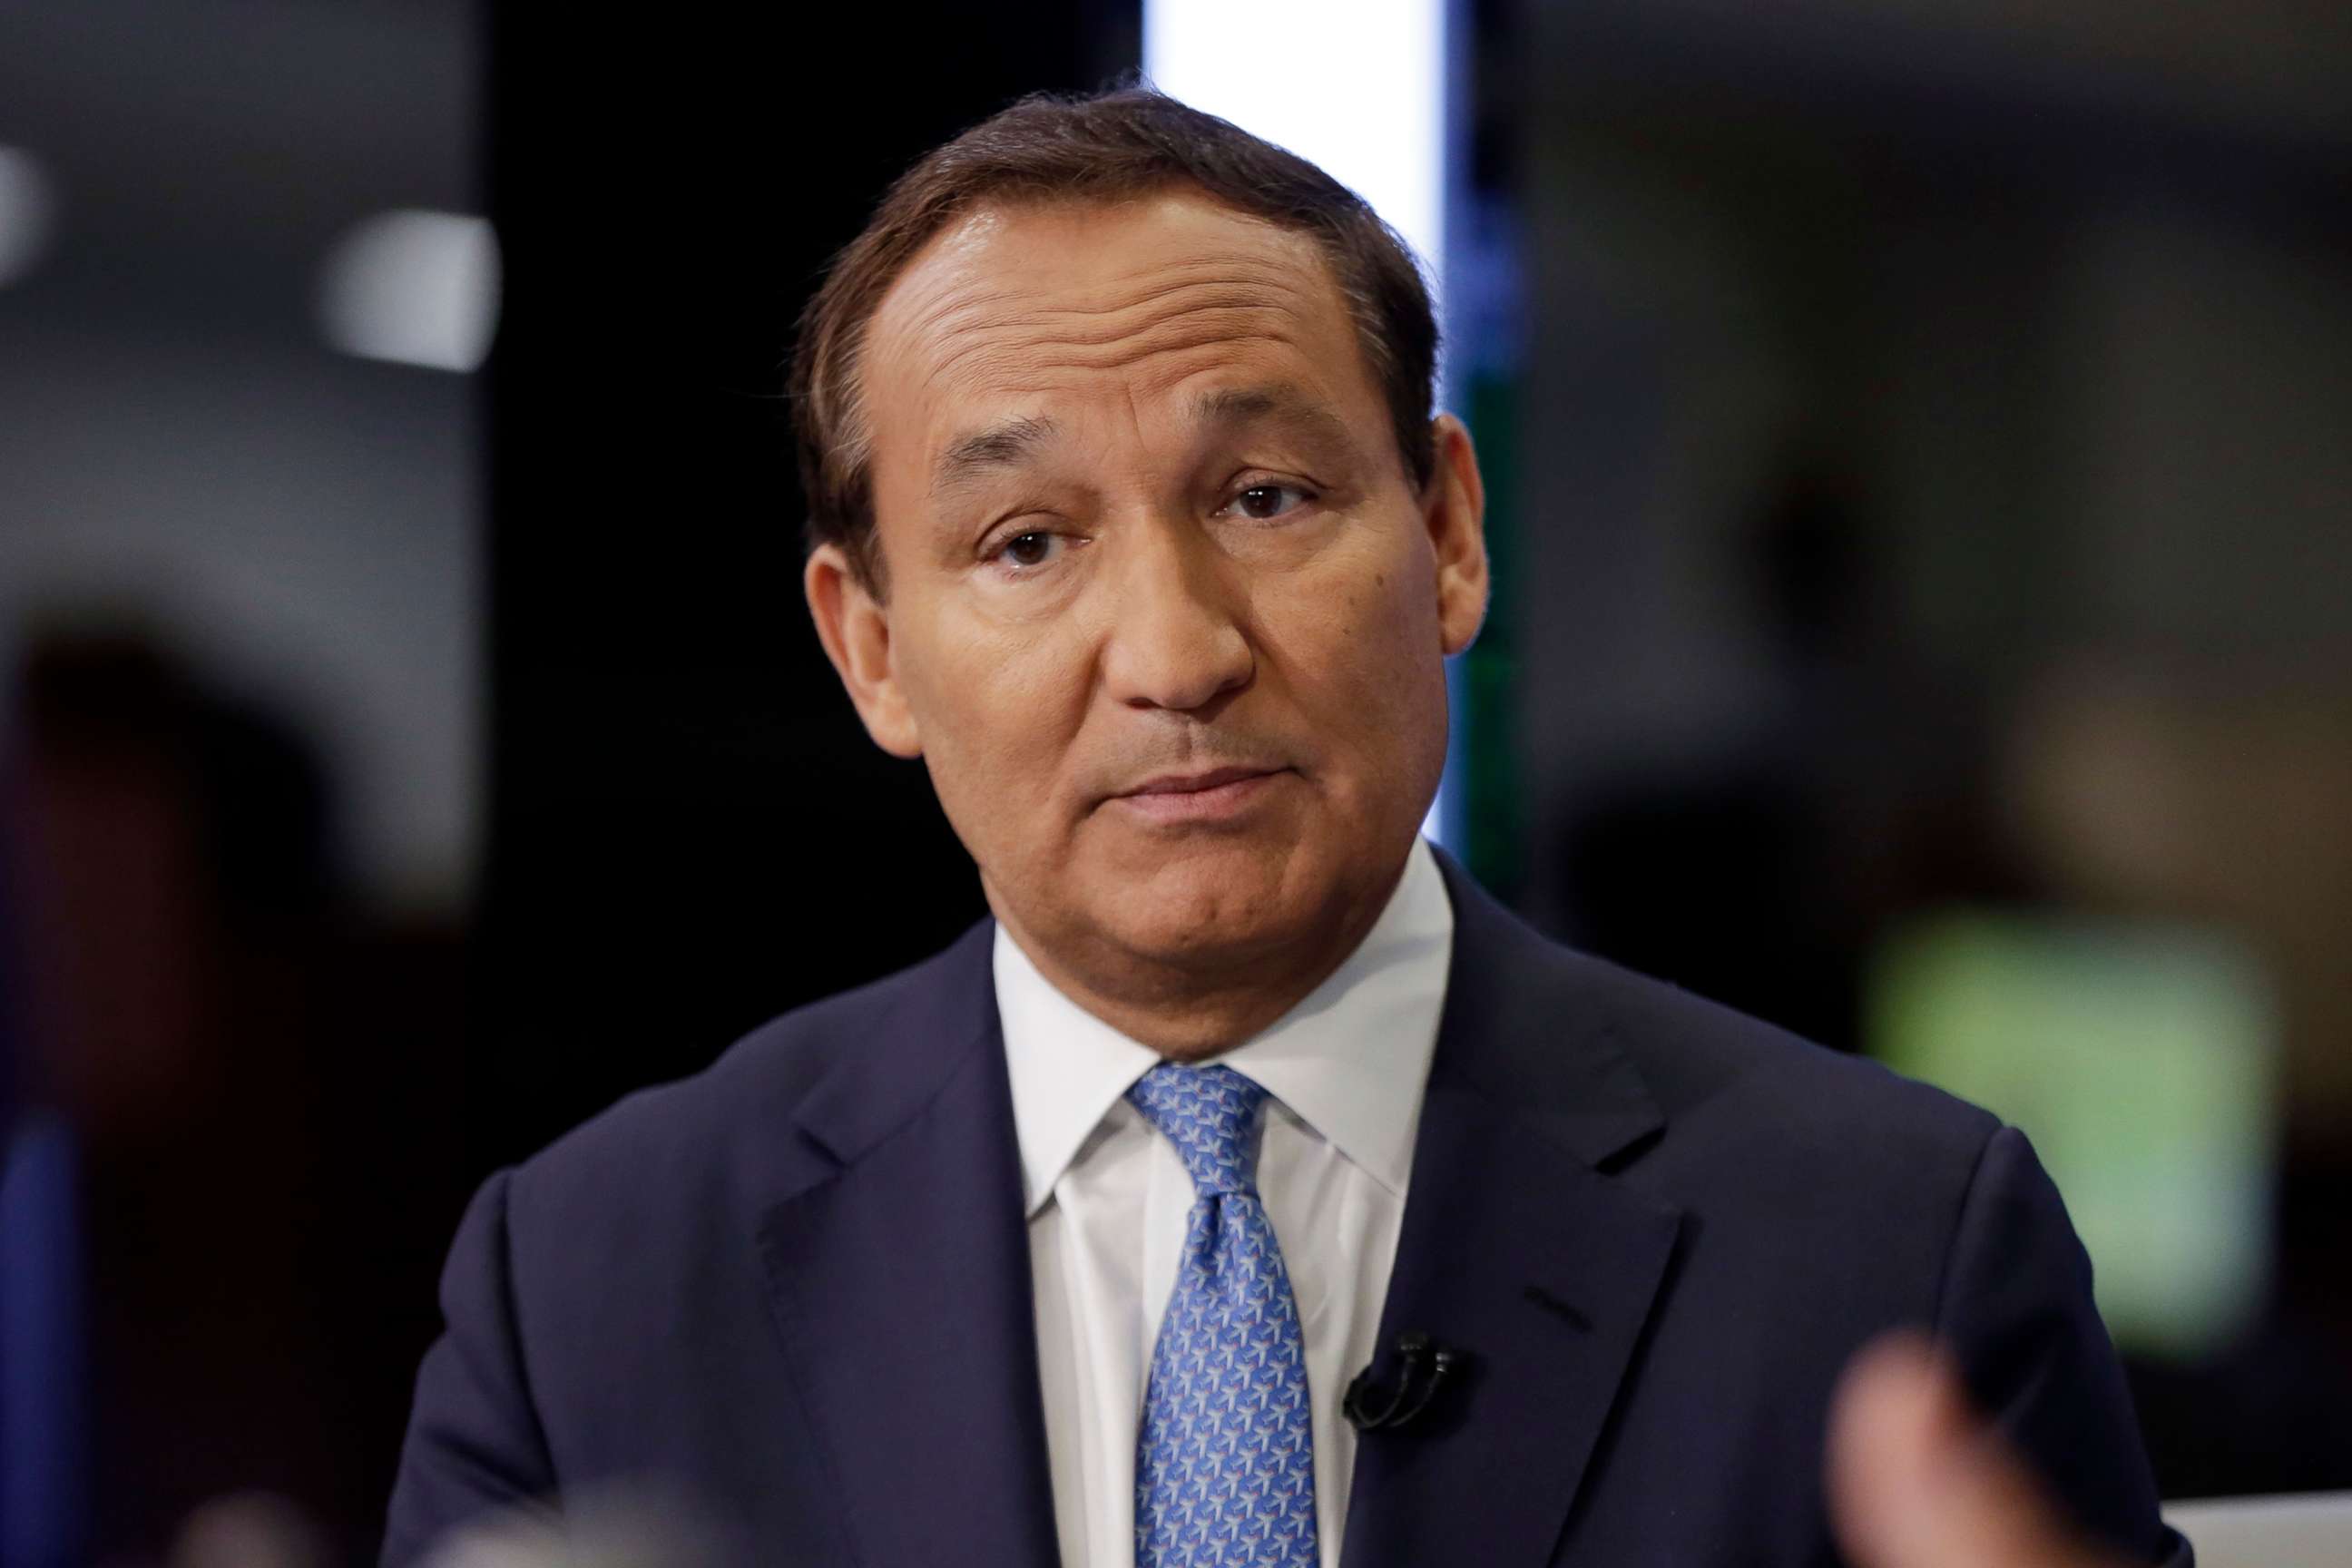 PHOTO: Oscar Munoz is interviewed on the floor of the New York Stock Exchange in this Jan. 24, 2018 file photo.